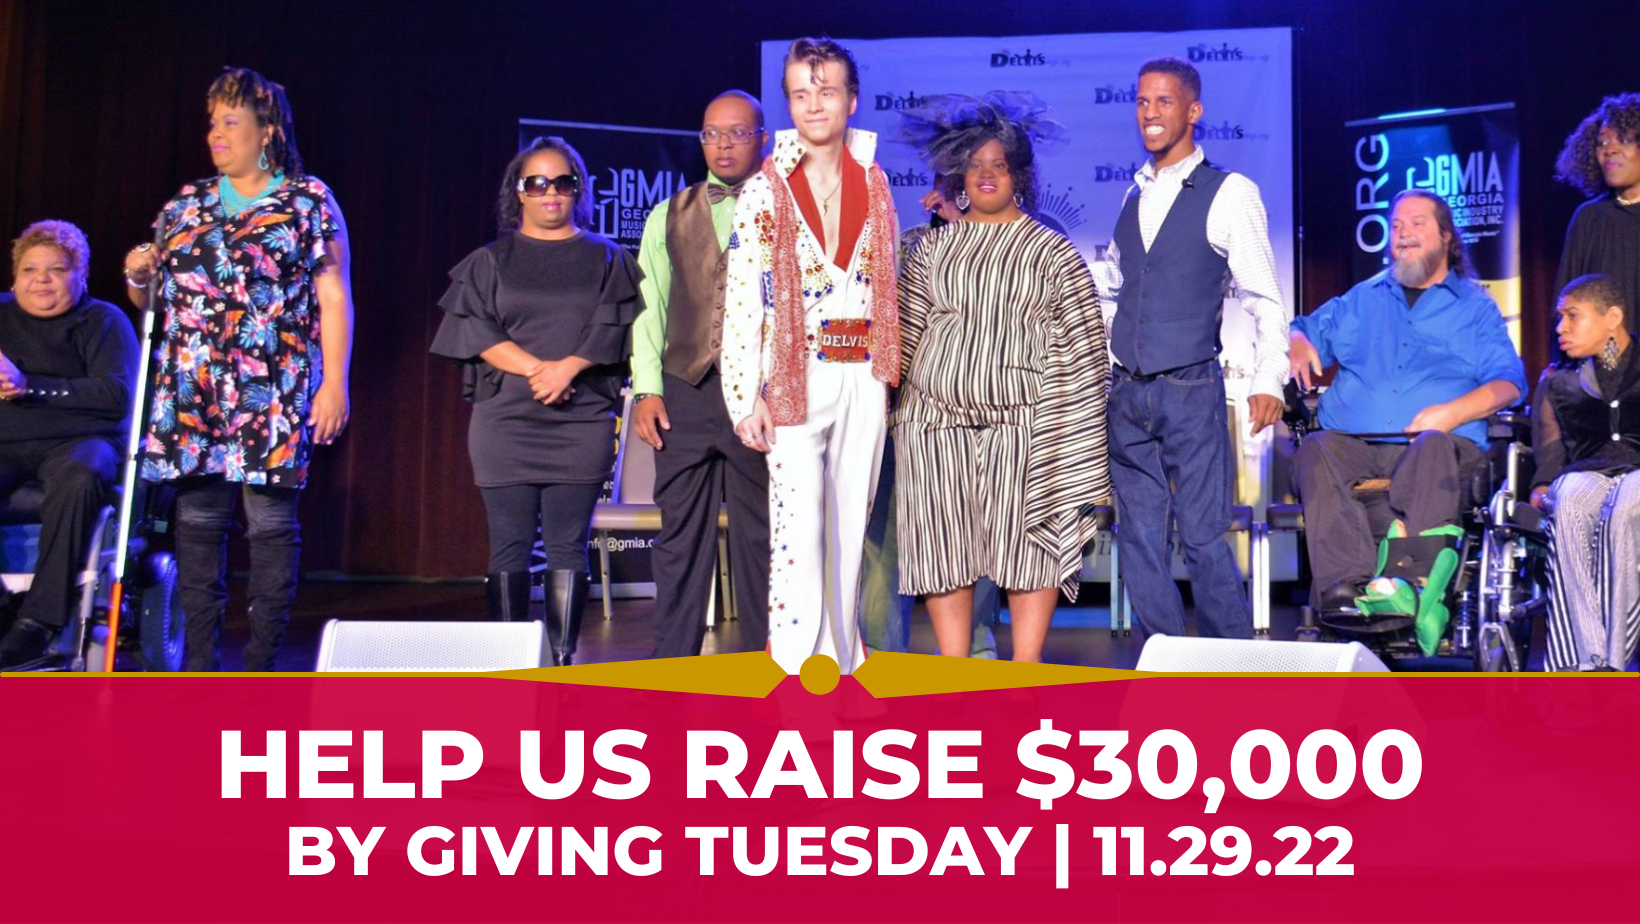 Click here to help us raise $30,000 by Giving Tuesday 11/29/22